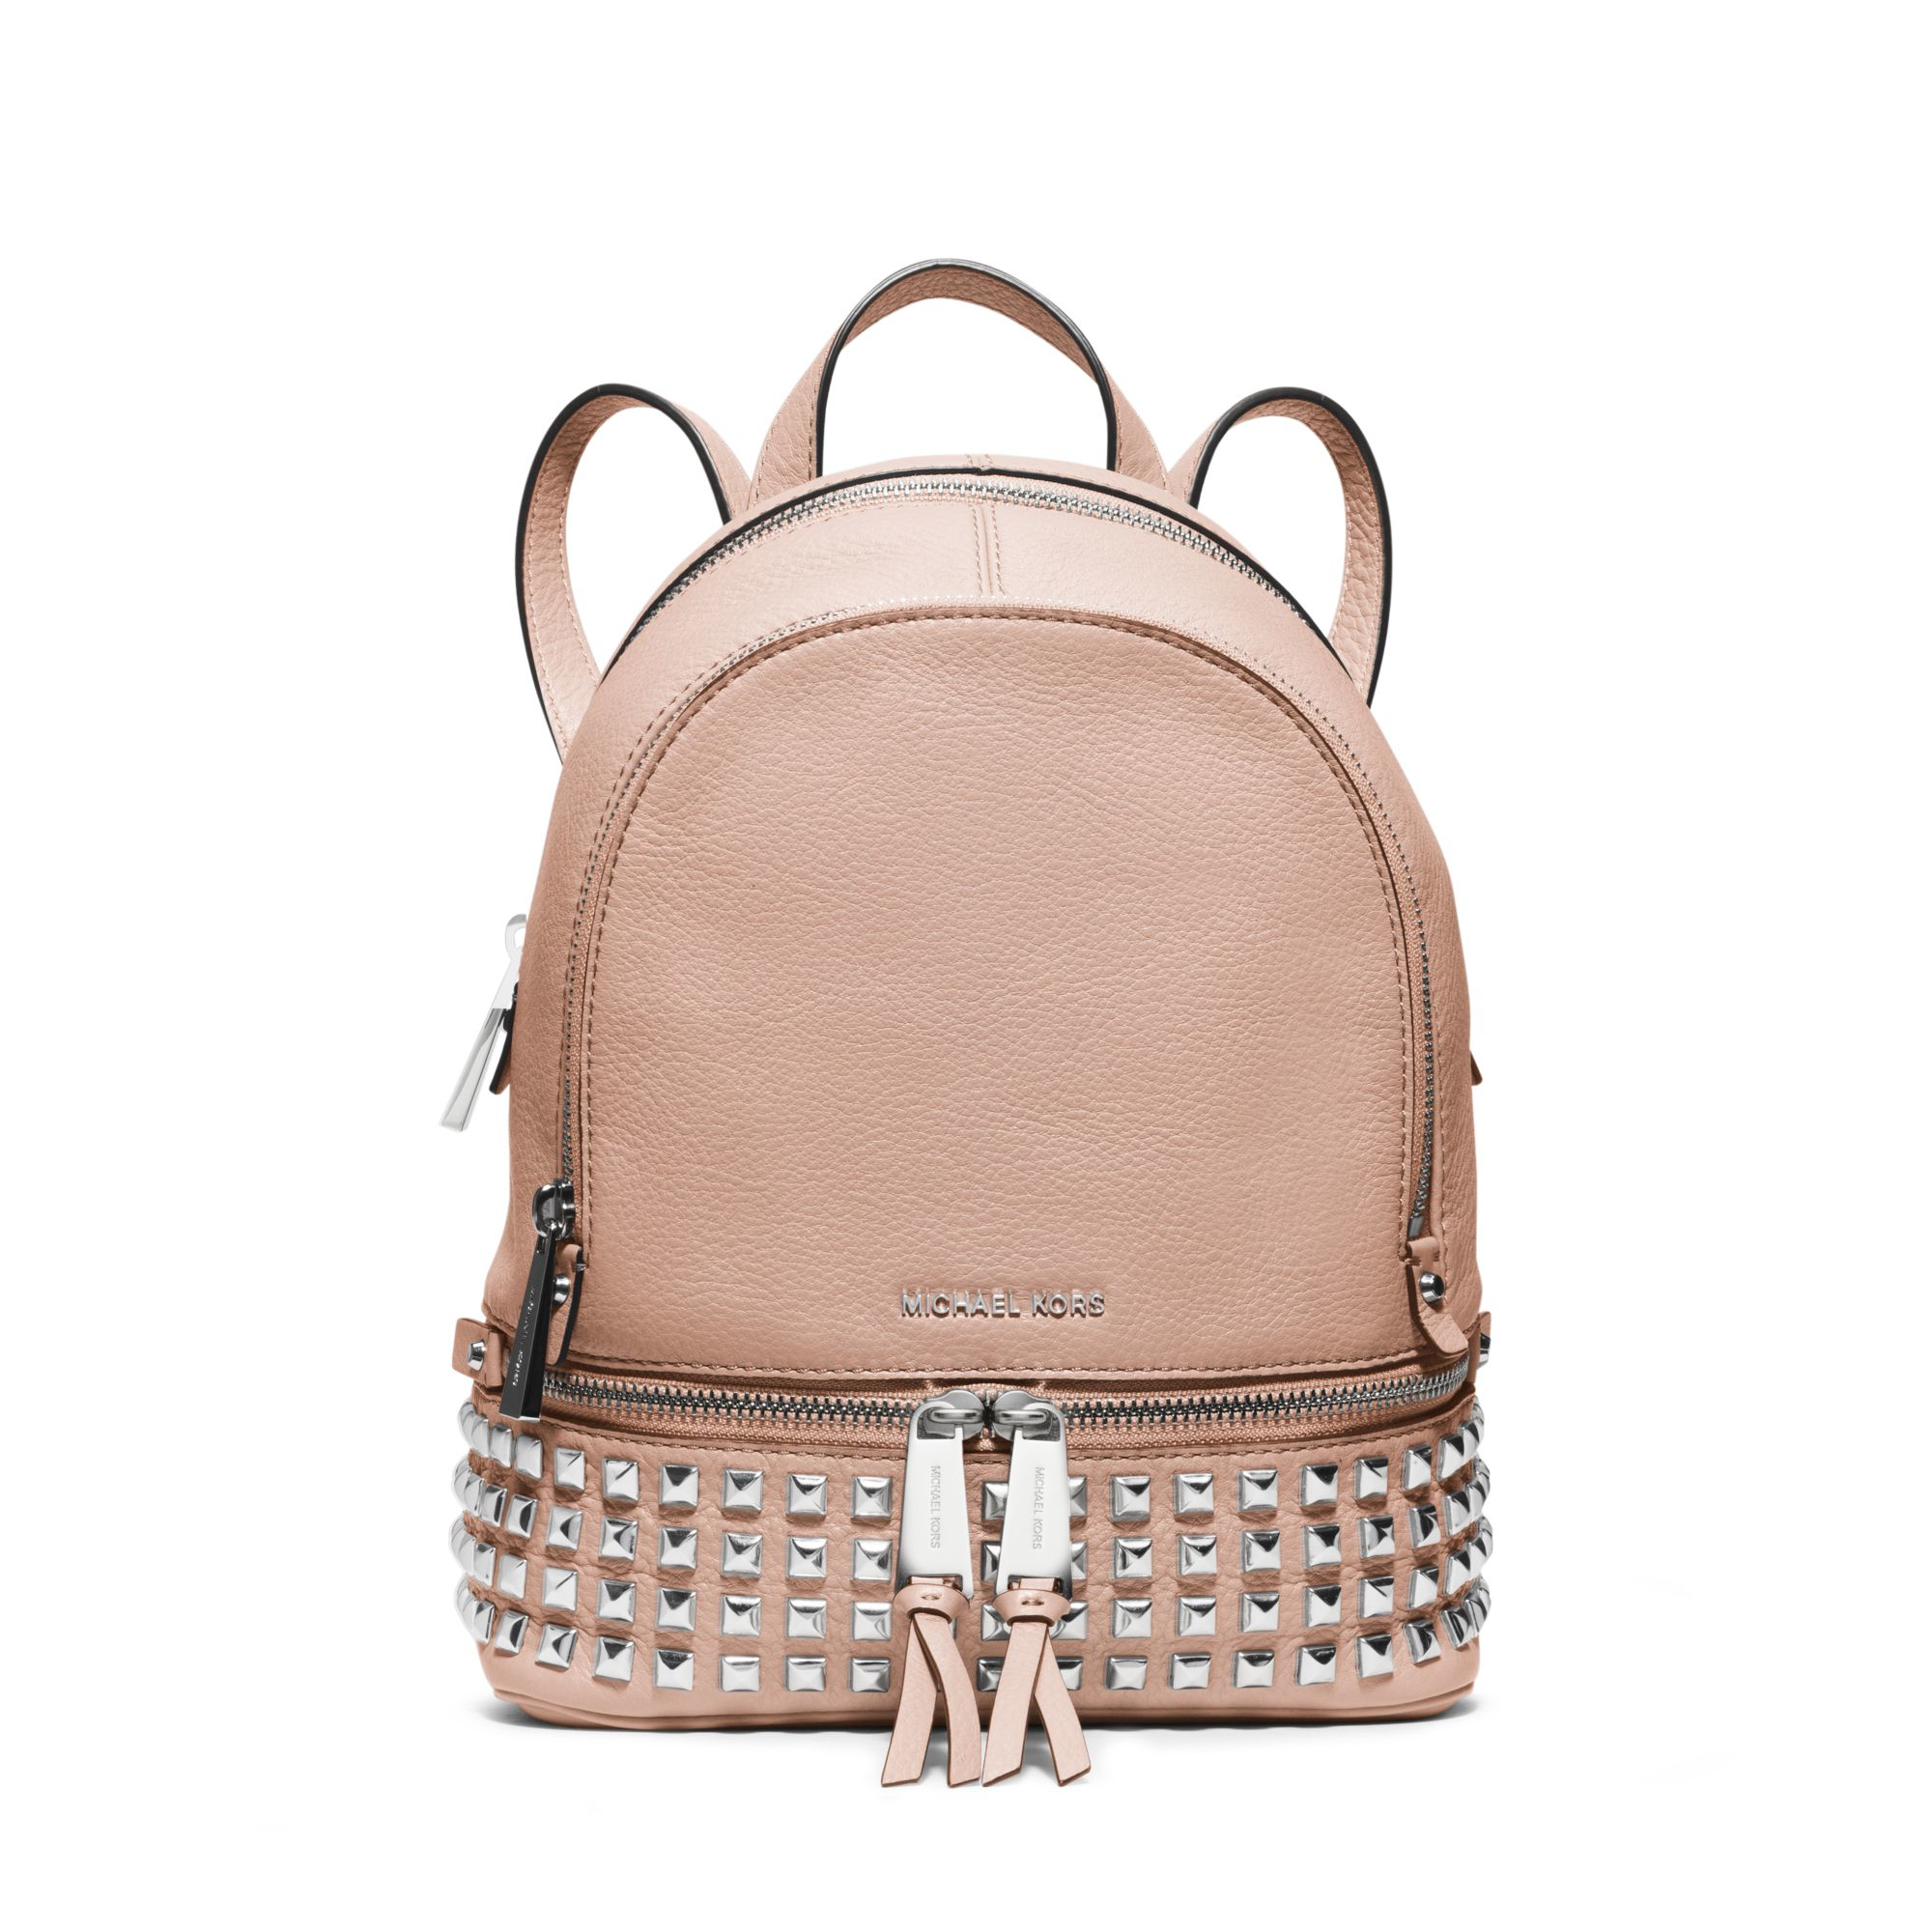 Michael kors Rhea Extra-small Leather Backpack in Beige (BALLET) | Lyst